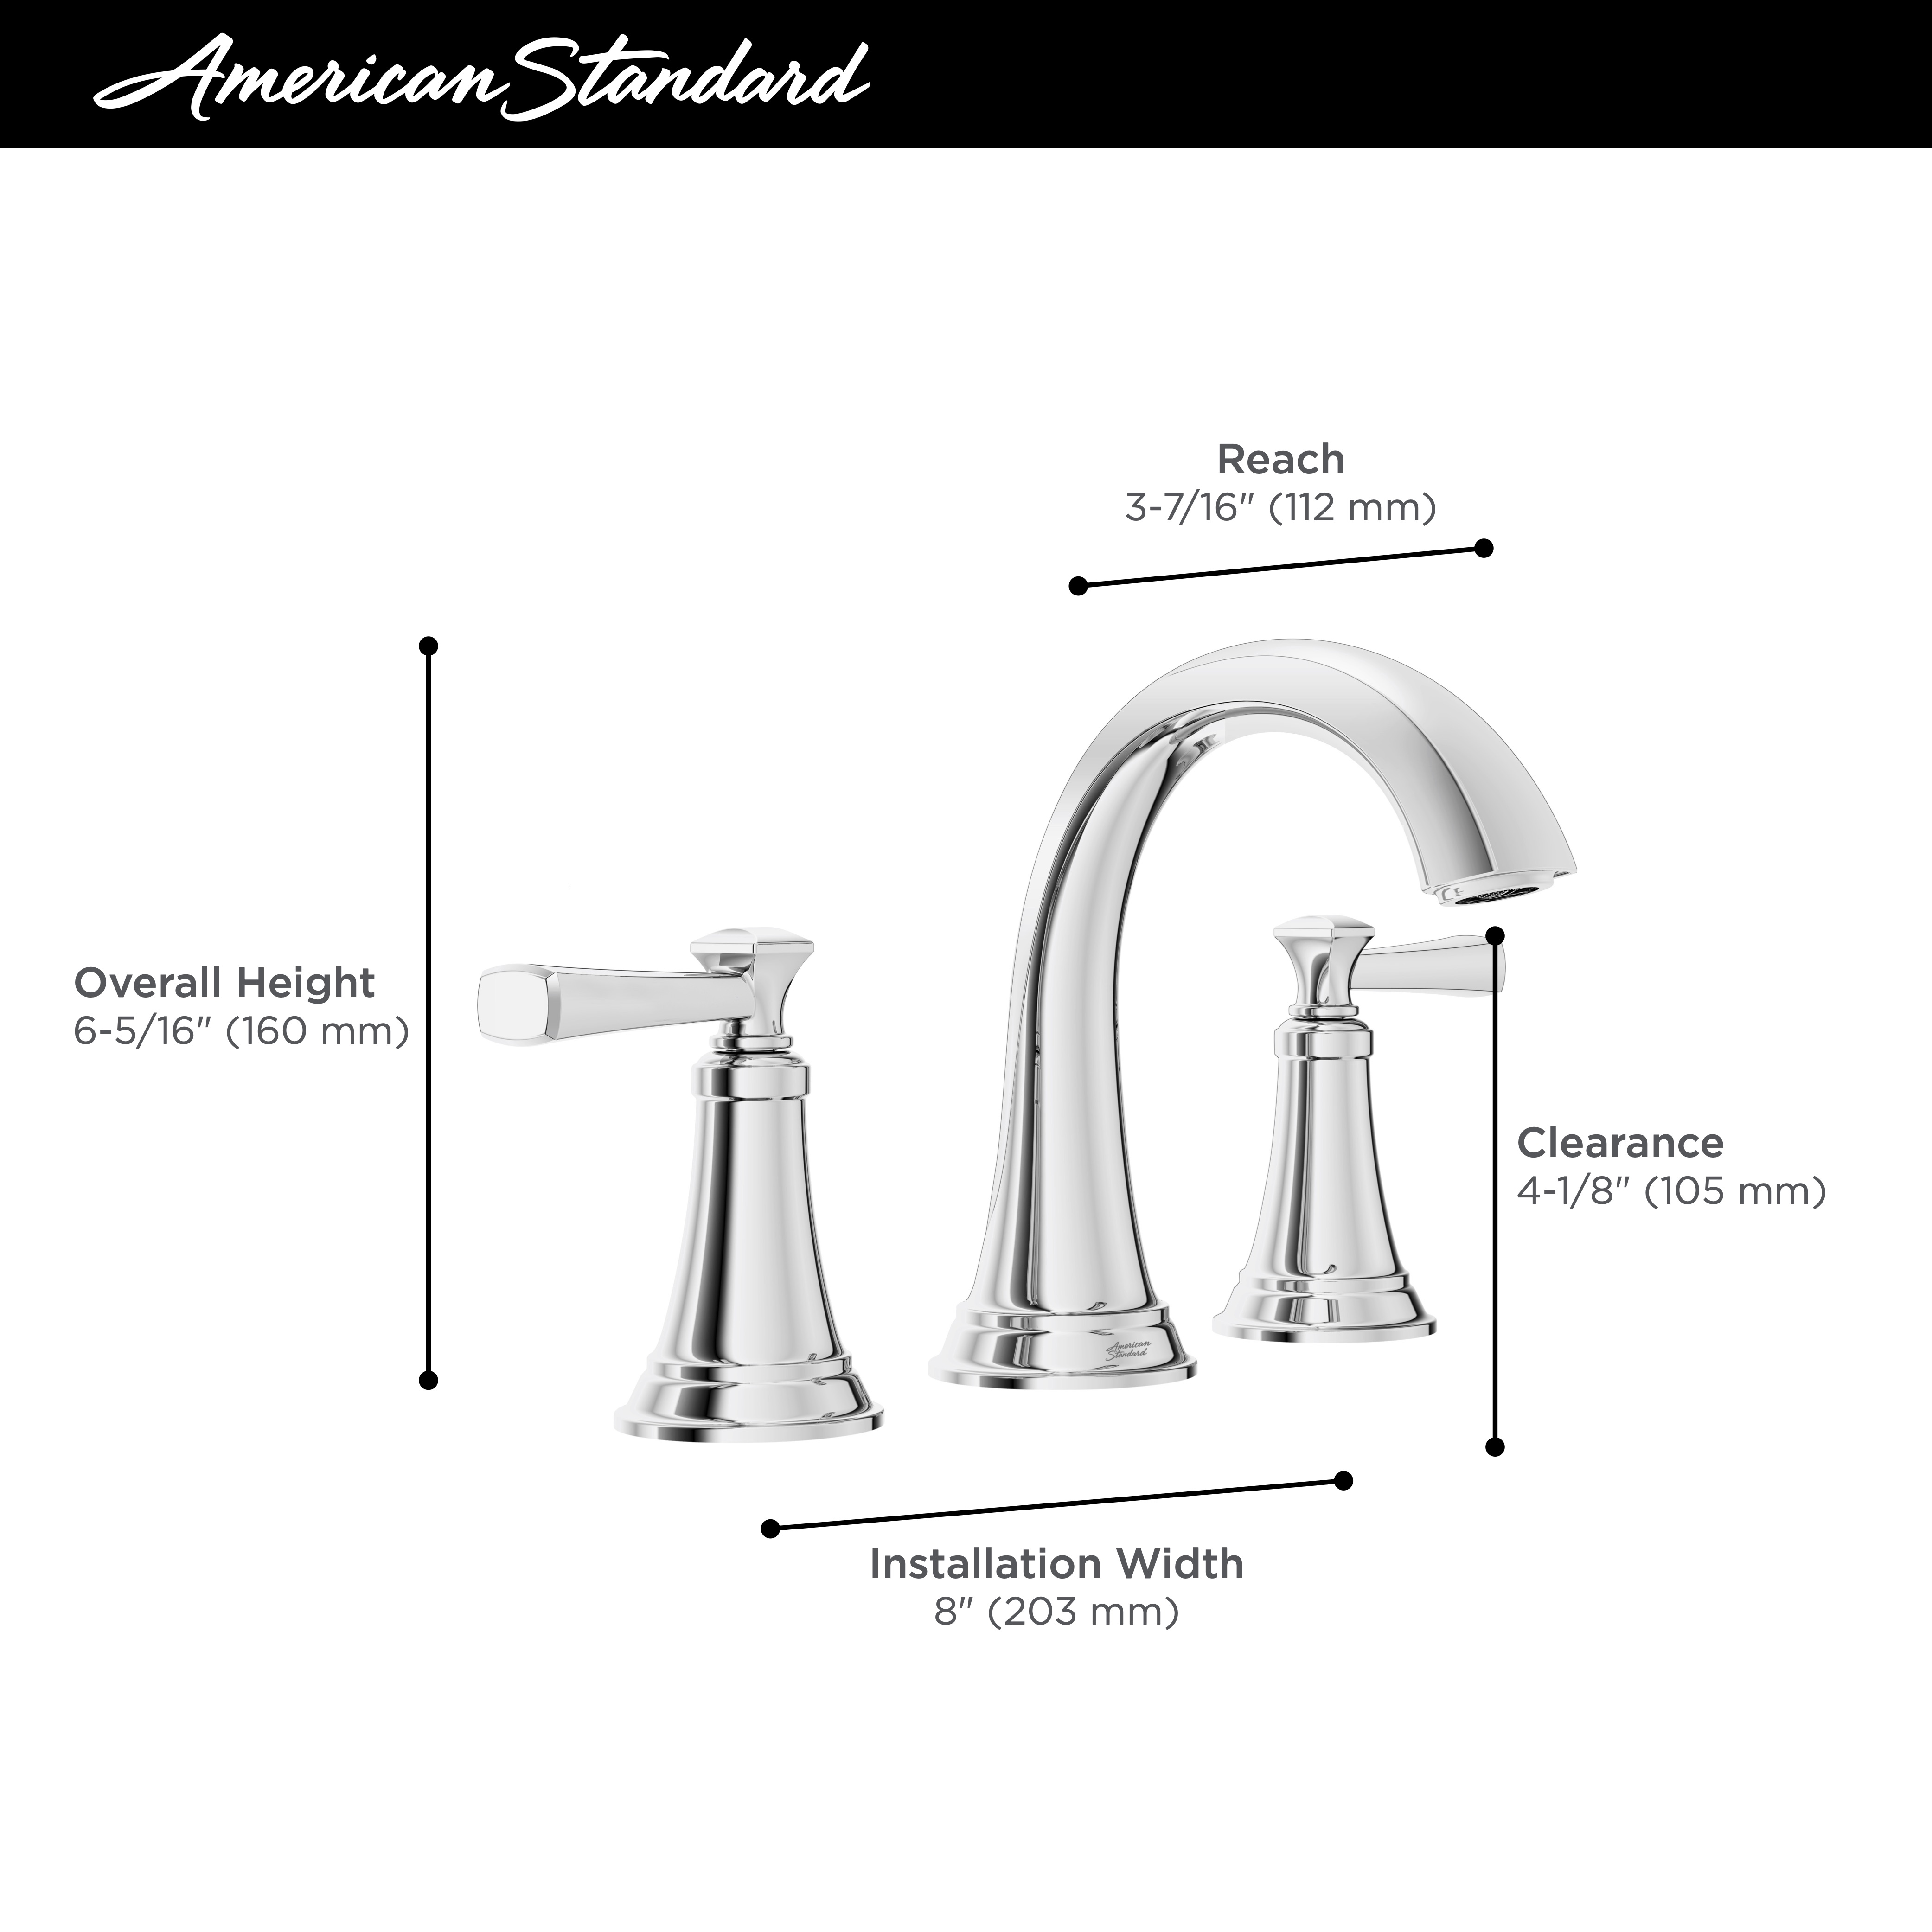 Glenmere™ 8-Inch Widespread 2-Handle Bathroom Faucet 1.2 gpm/4.5 L/min With Lever Handles